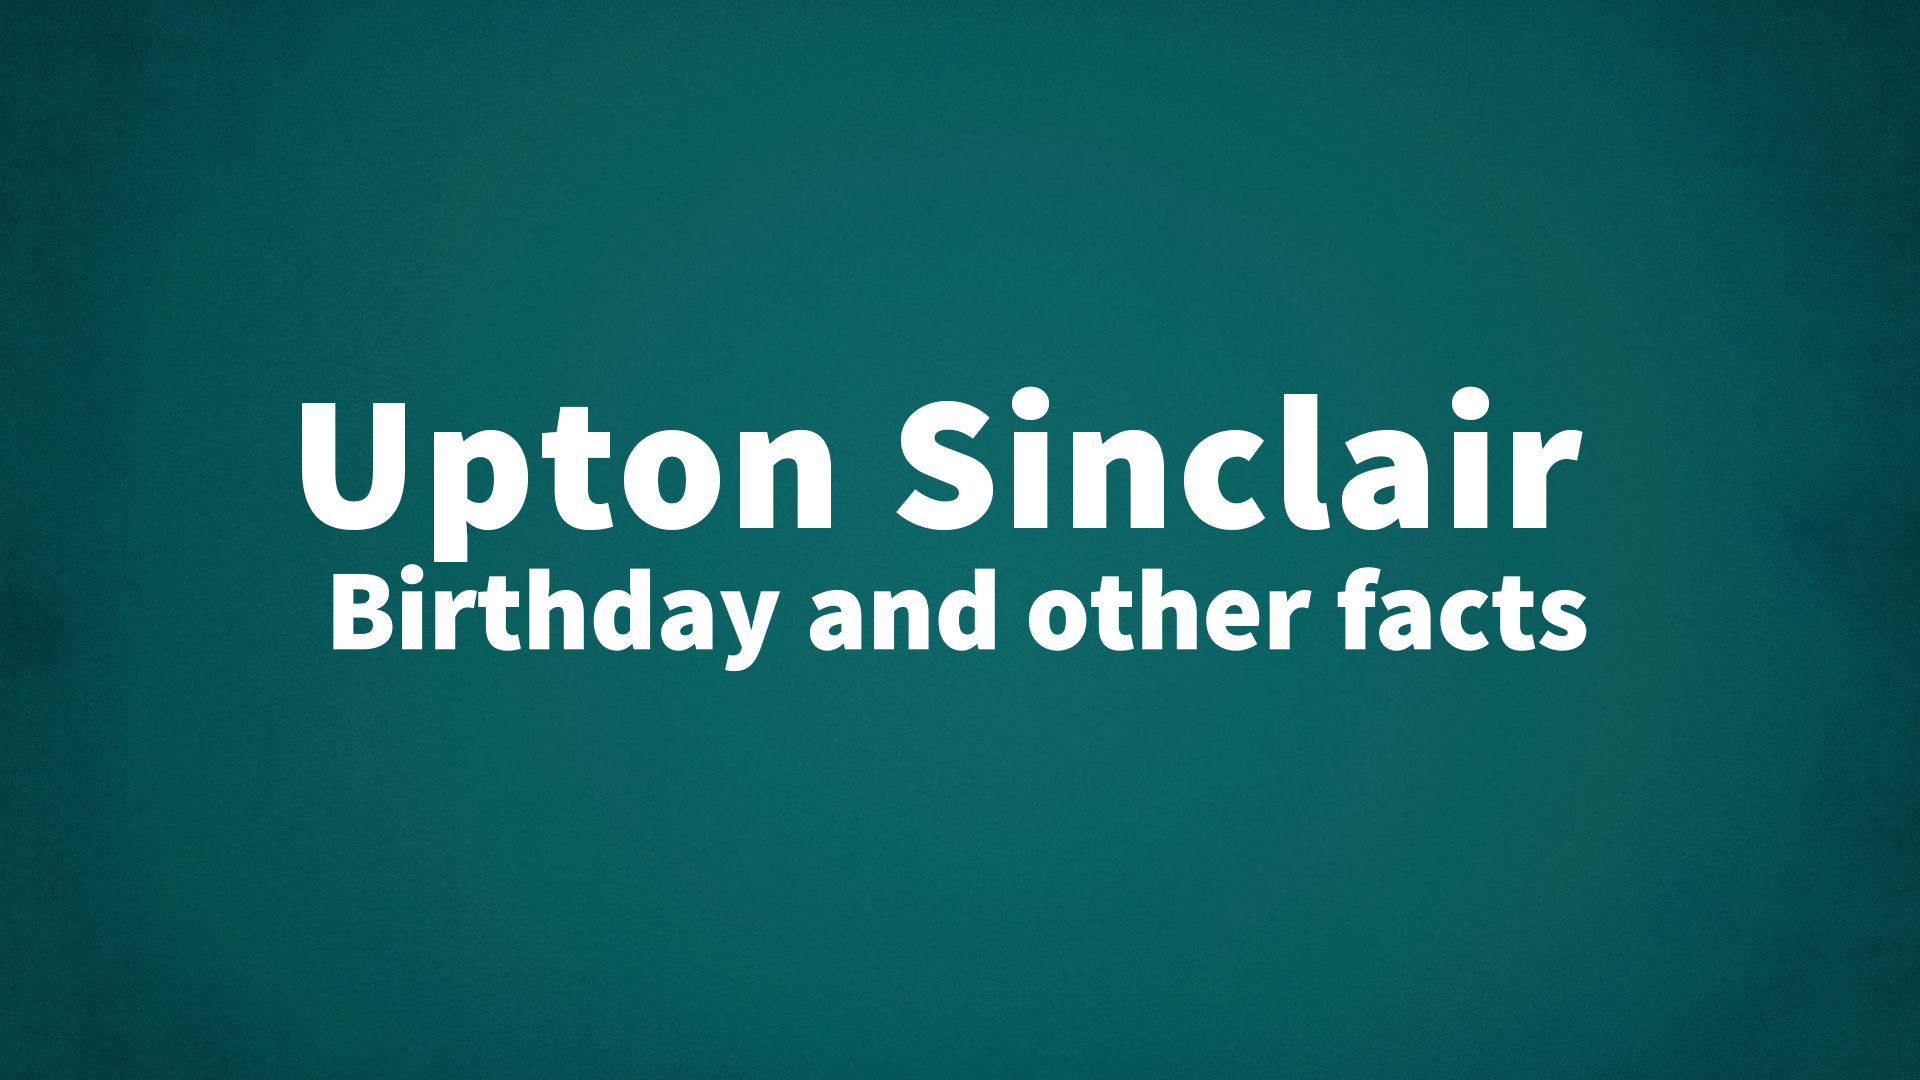 title image for Upton Sinclair birthday